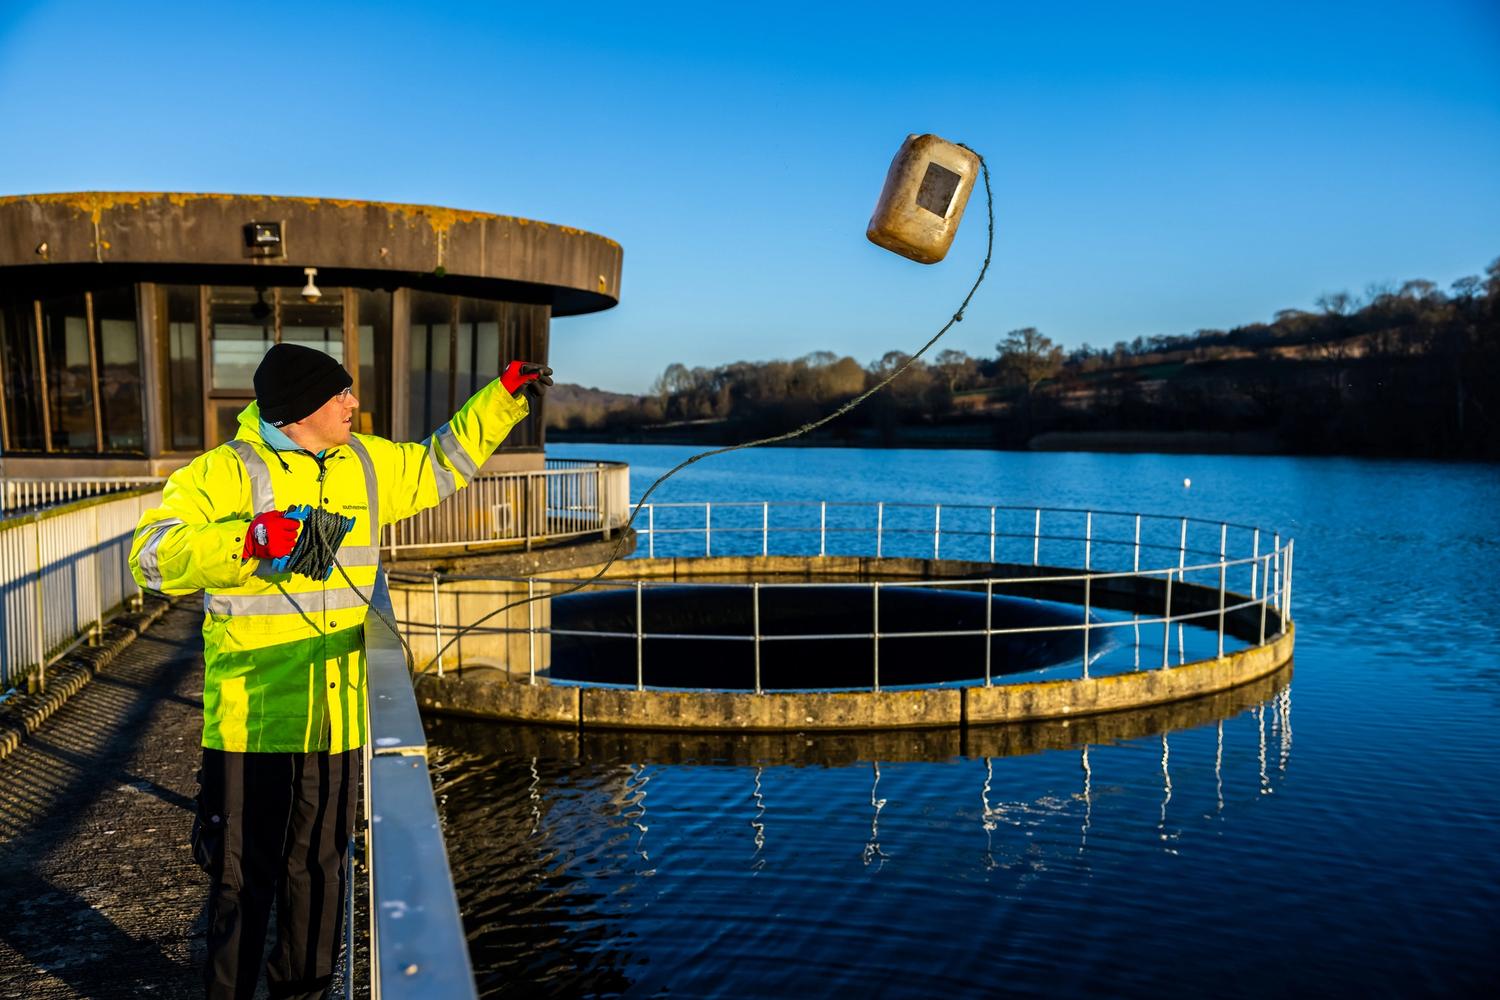 South East Water employee throwing a sample box into a reservoir 